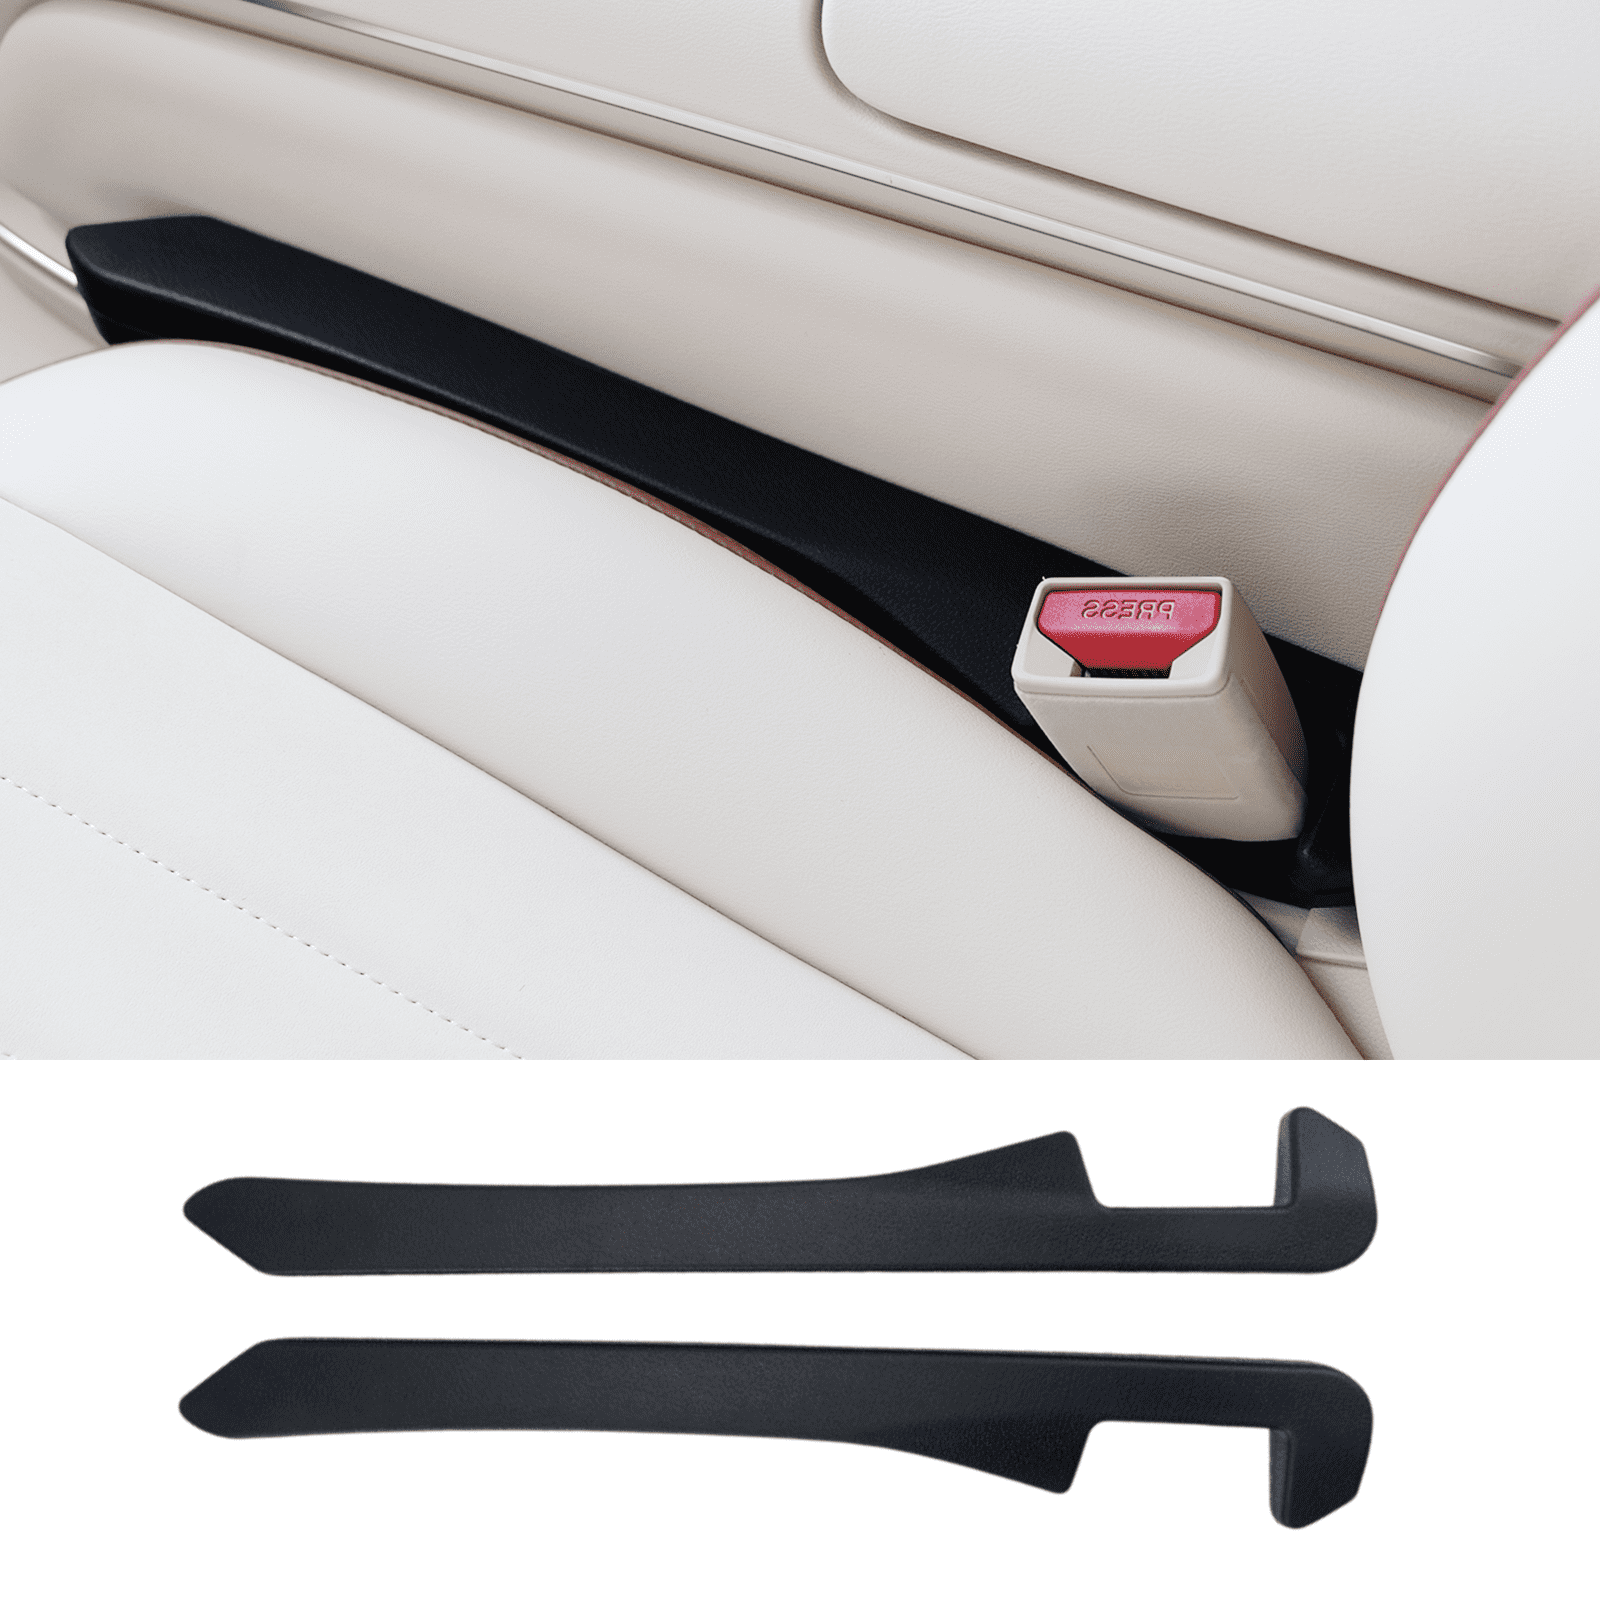 Wuzno Leather Car Seat Gap Filler, 2 Pack Universal Gap Stopper/Catcher to  Fill The Gap Between Seat and Console Black Car Crevice Blocker Pad YMT